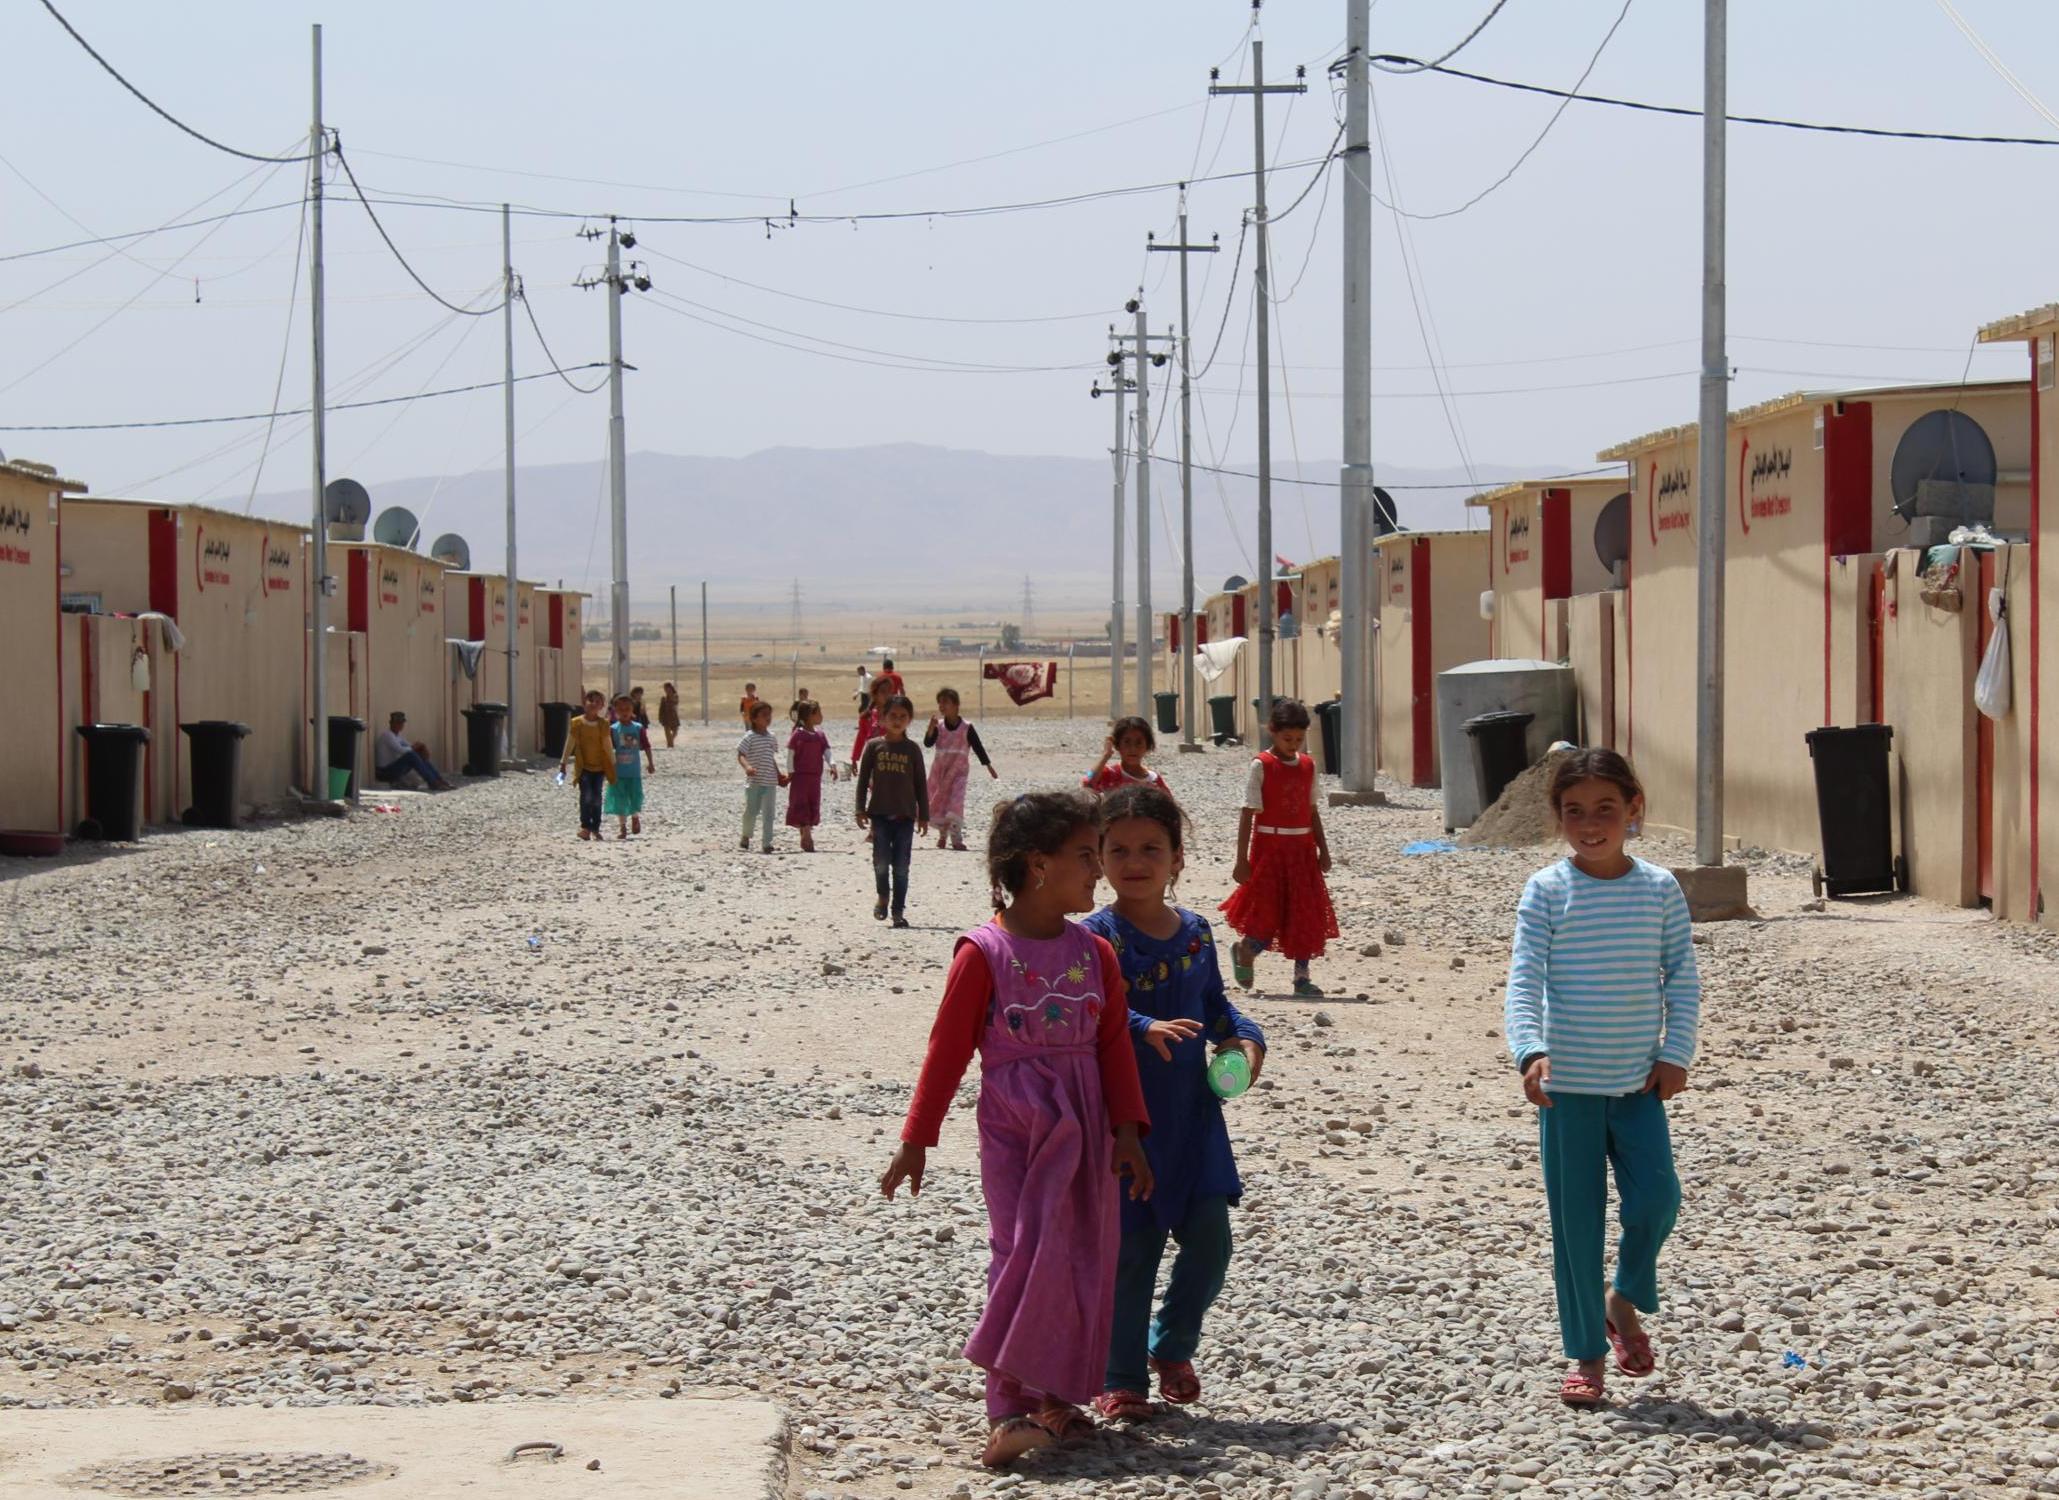 Children take advantage of their lunch break to play and wander the streets in Dibaga 2 IDP camp, south of Mosul, on 9 May 2017 